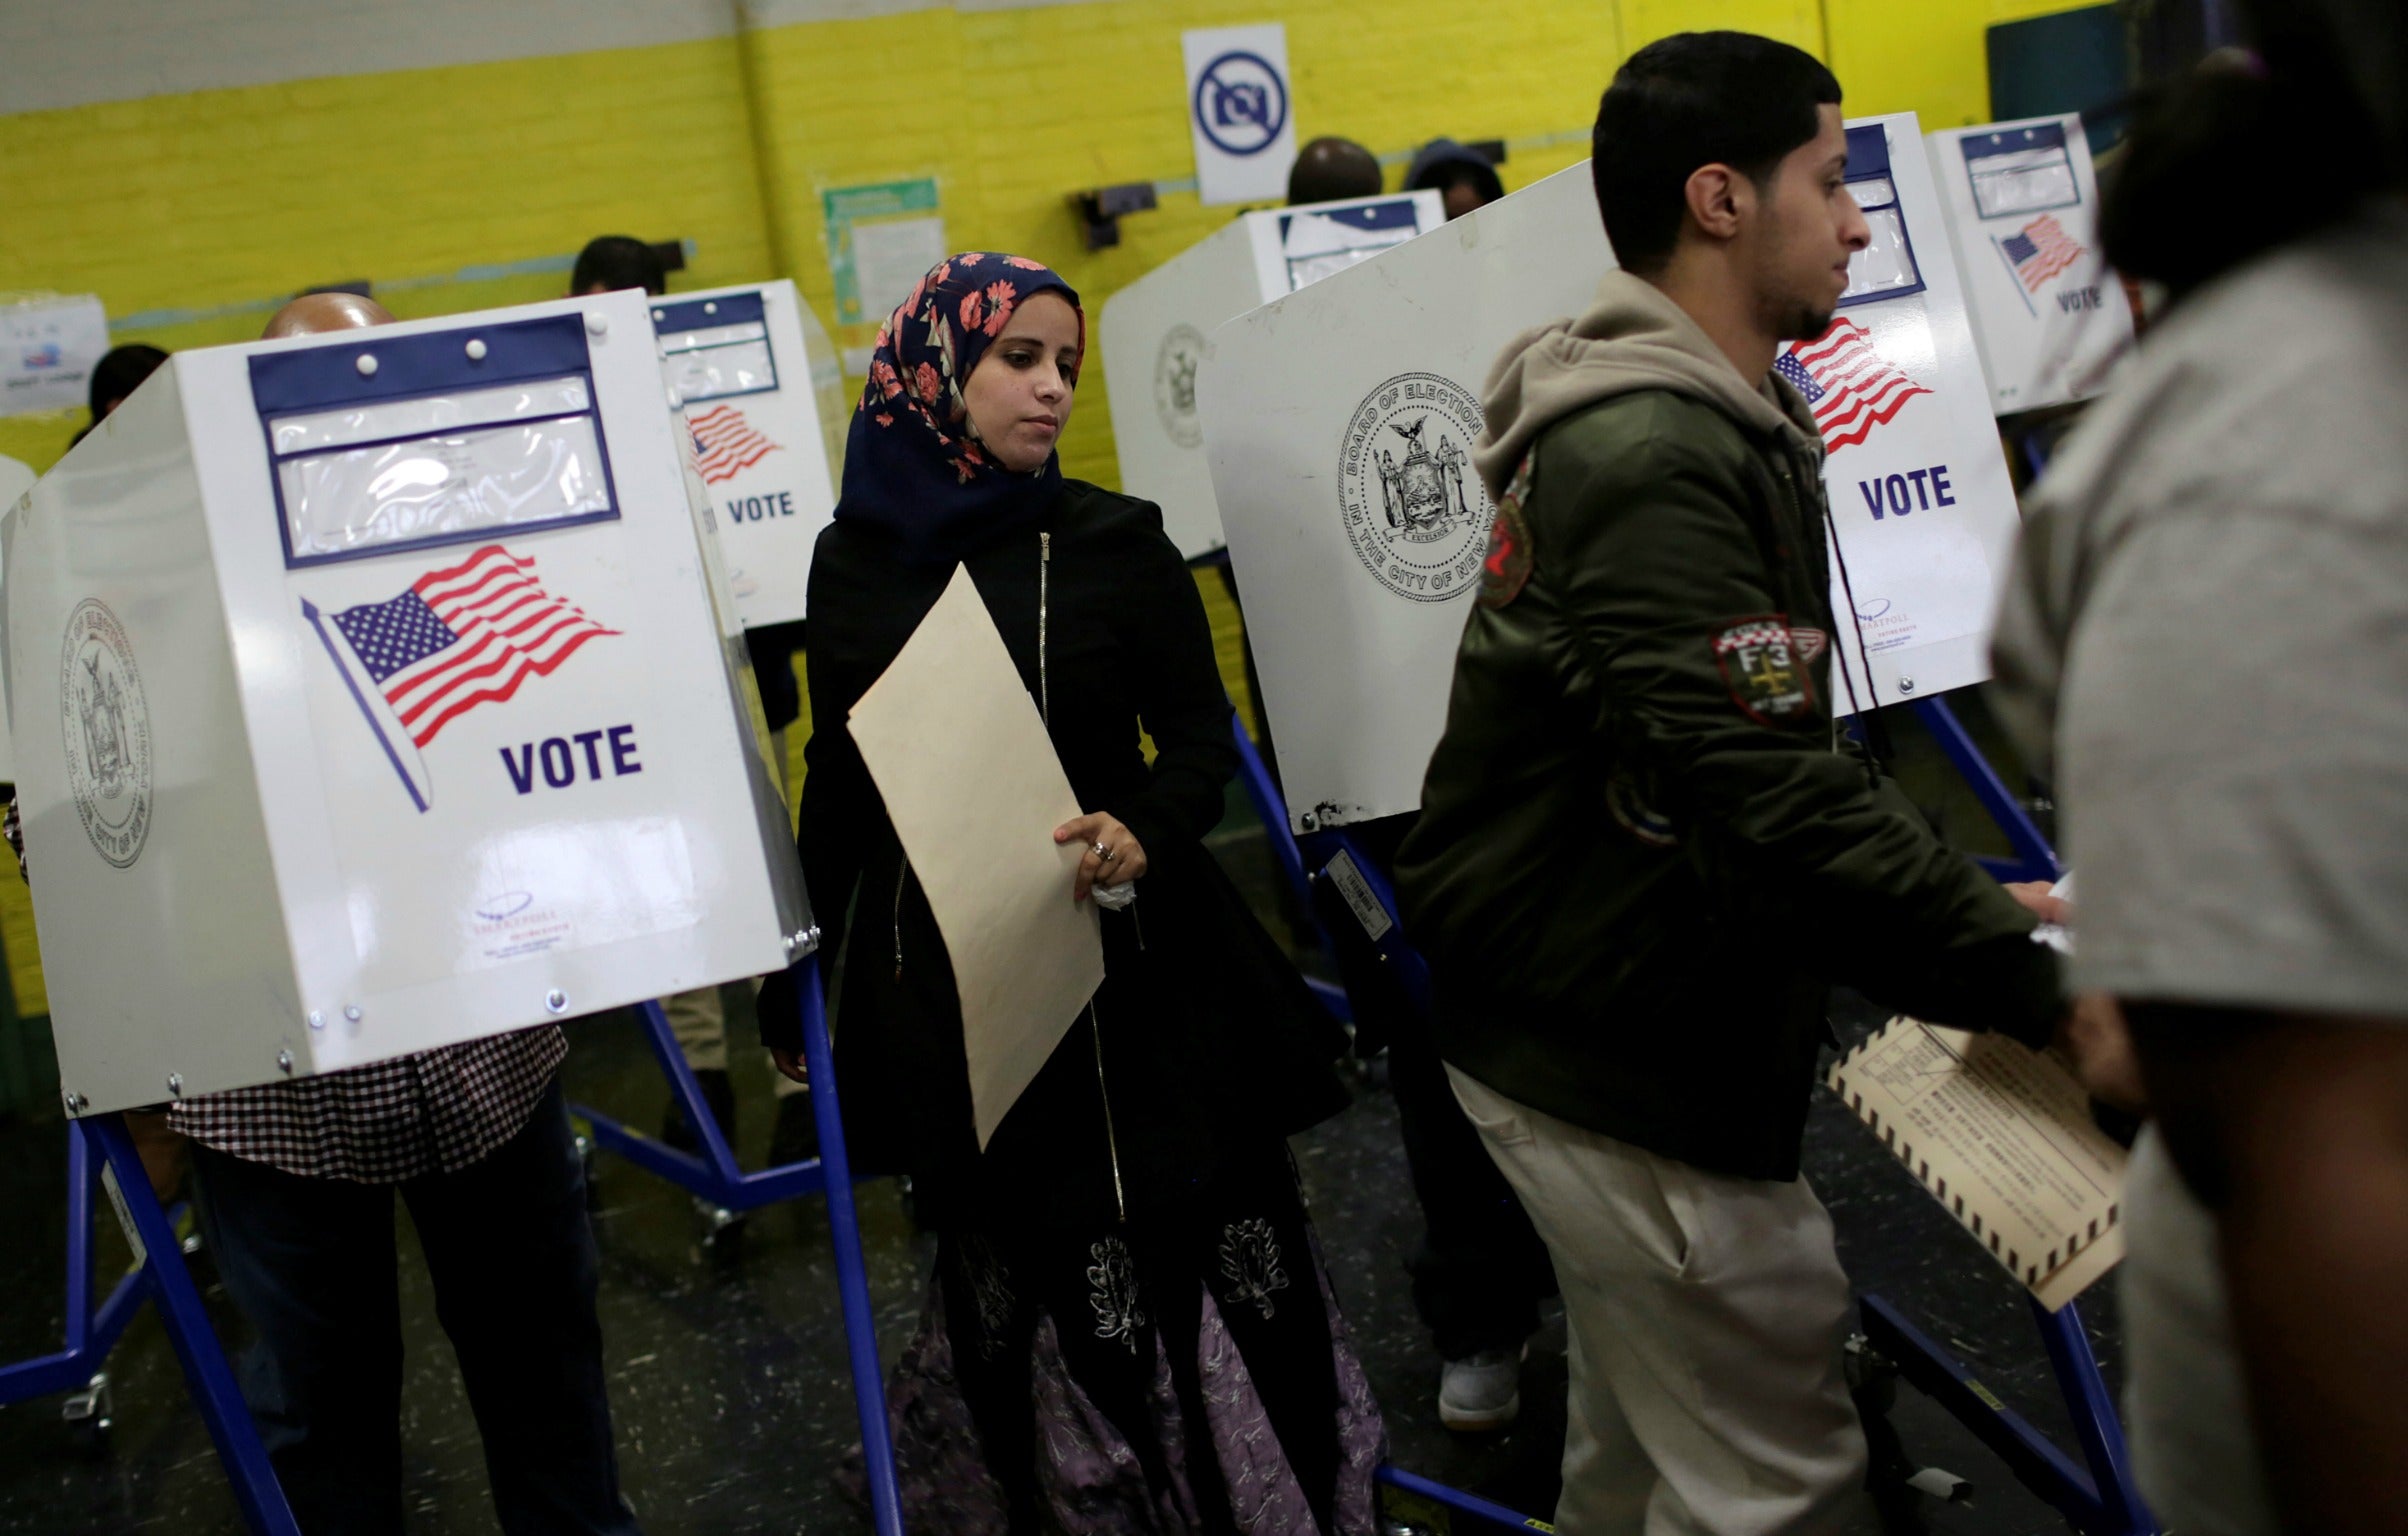 Voters cast ballots in the Bronx, New York on November 8, 2016